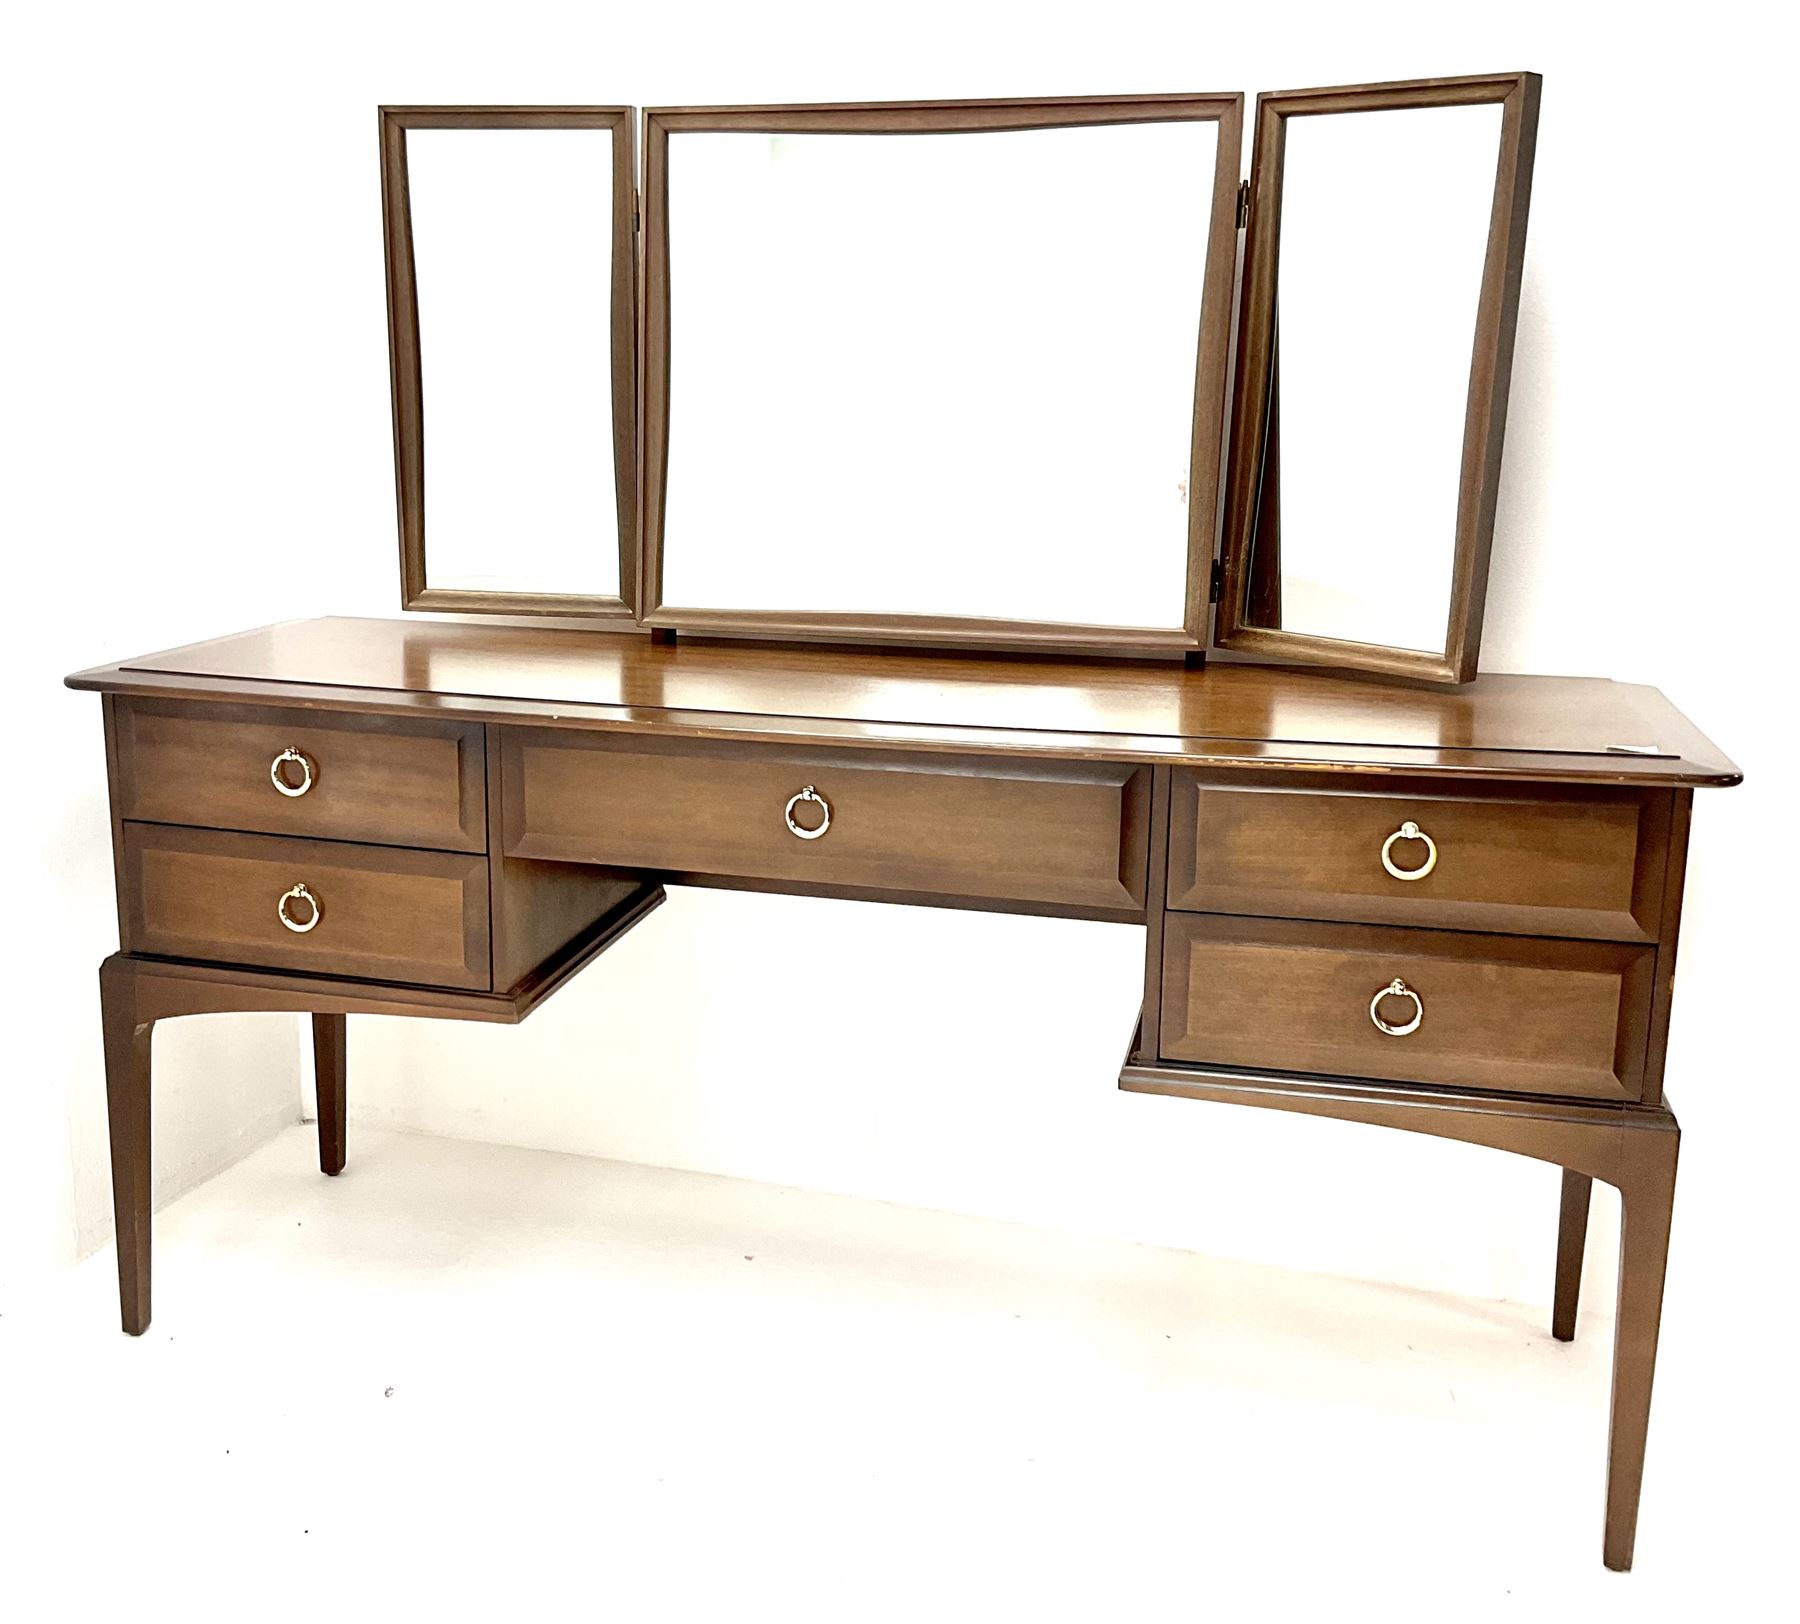 Stag minstrel dressing table